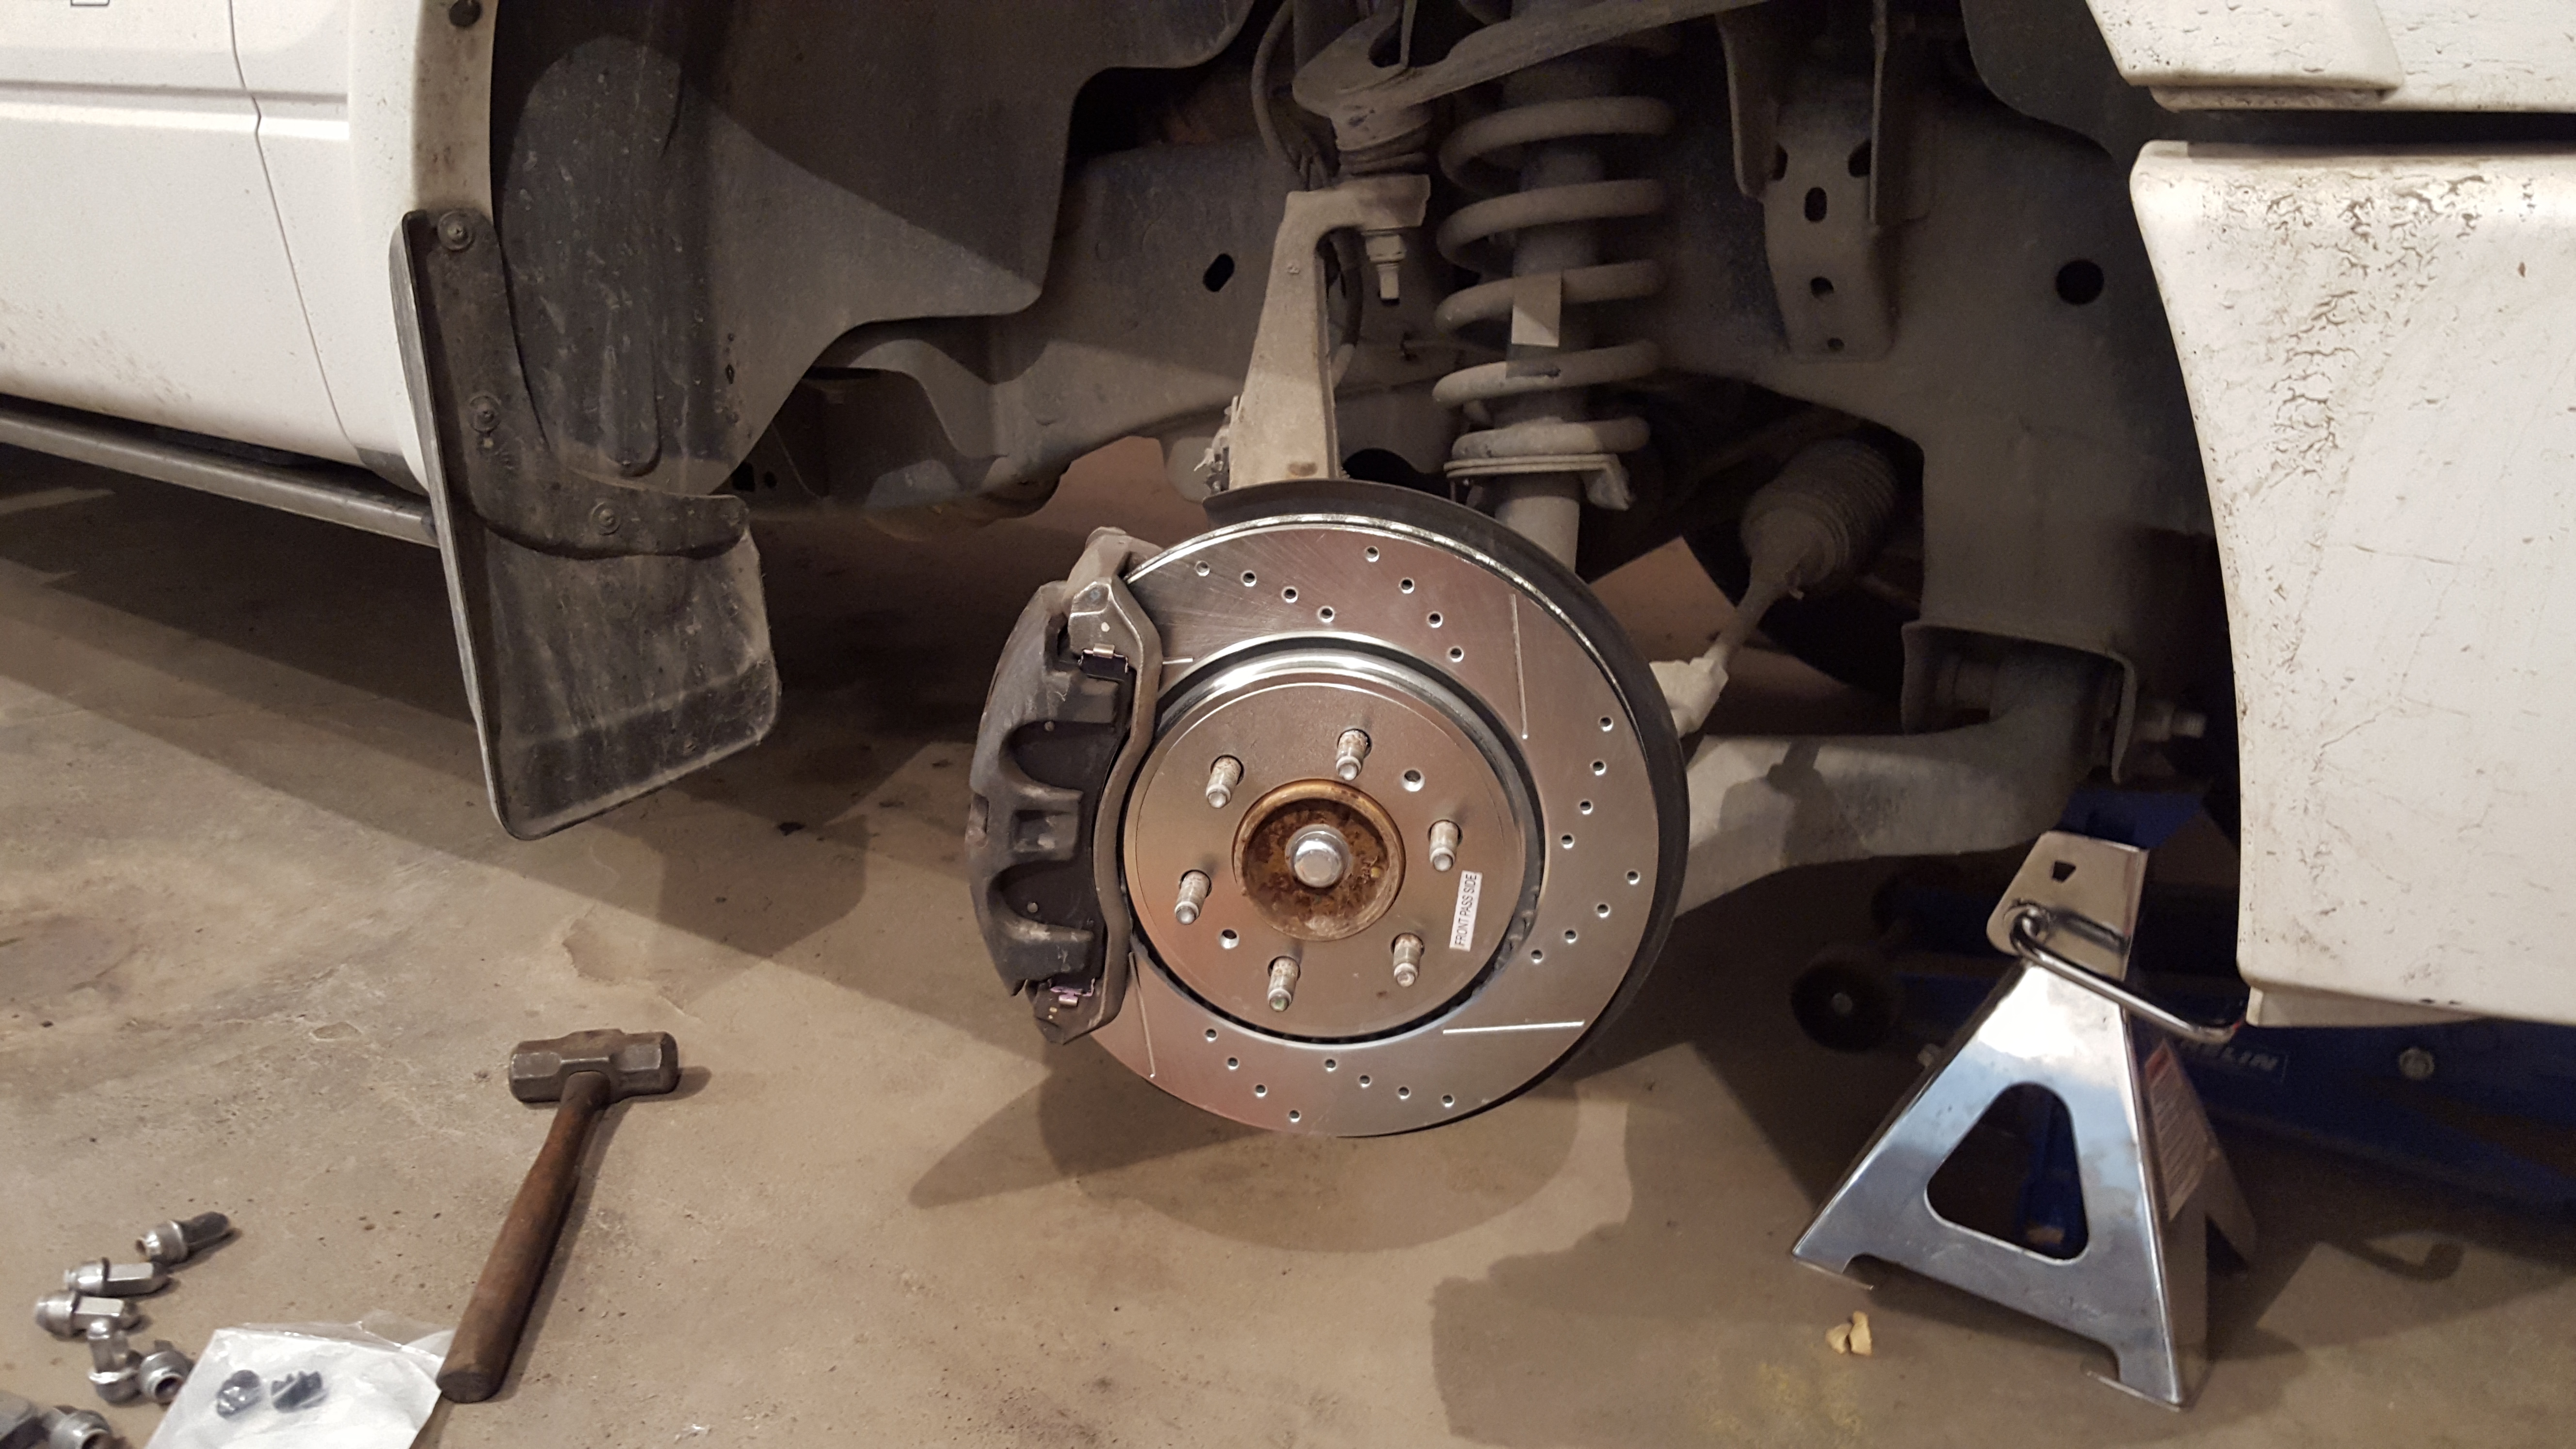 Aftermarket Brake Rotors and/or Pads? Come on in! - Ford F150 Forum -  Community of Ford Truck Fans